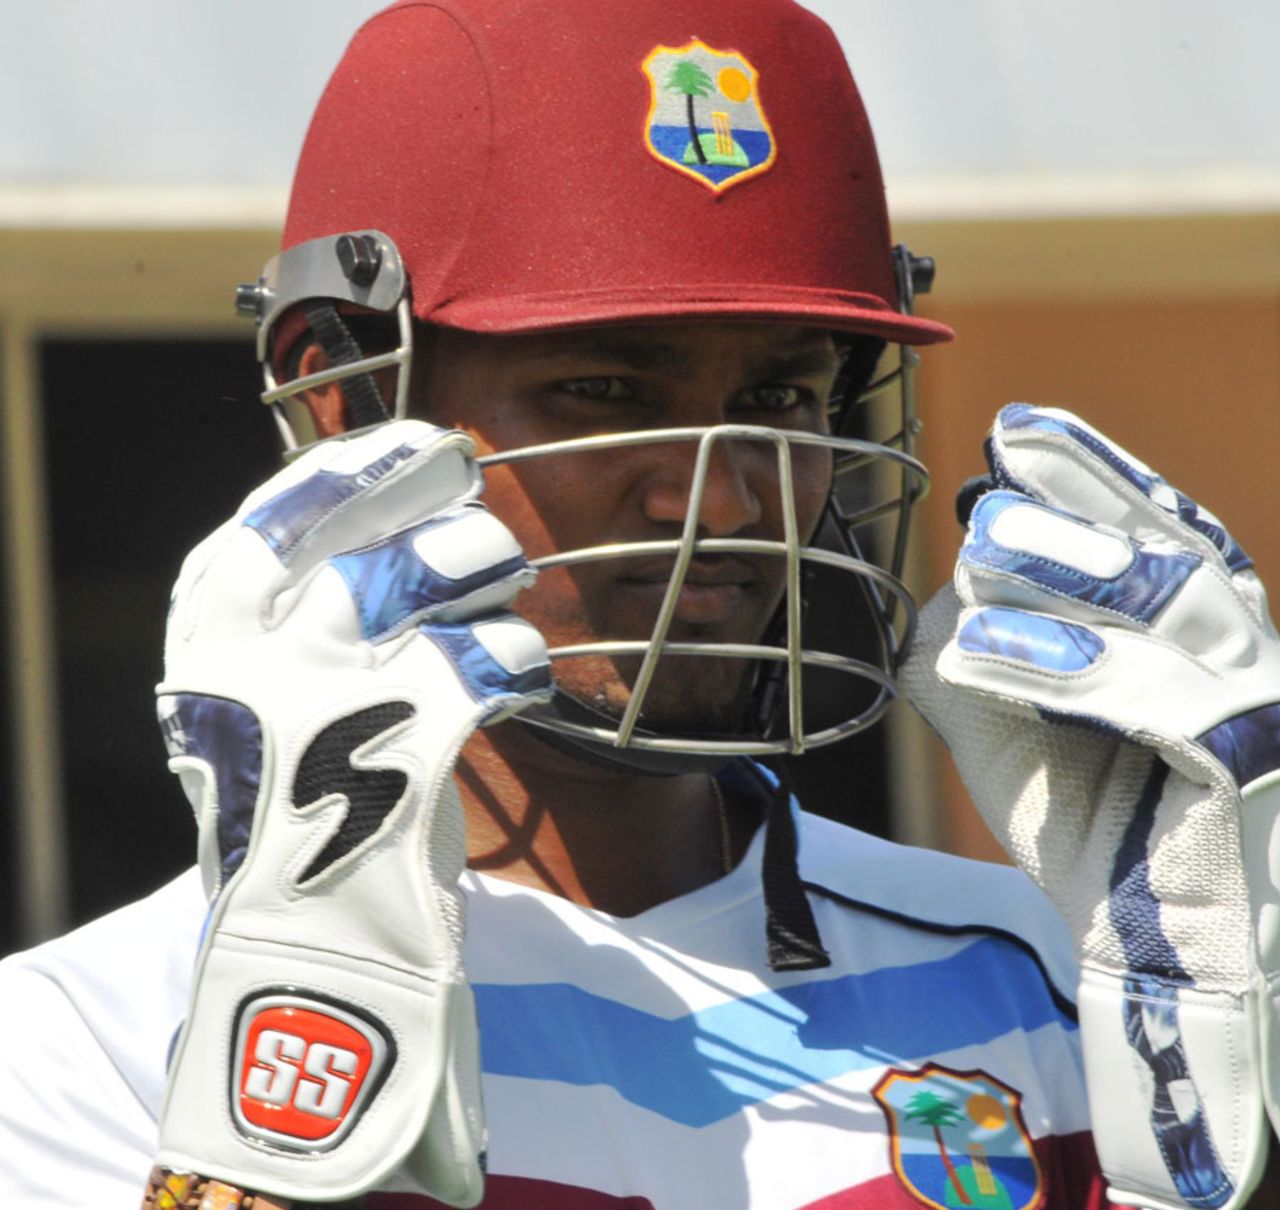 West Indies wicketkeeper Denesh Ramdin at a training session in St George's, Grenada, West Indies v Zimbabwe, February 21, 2013